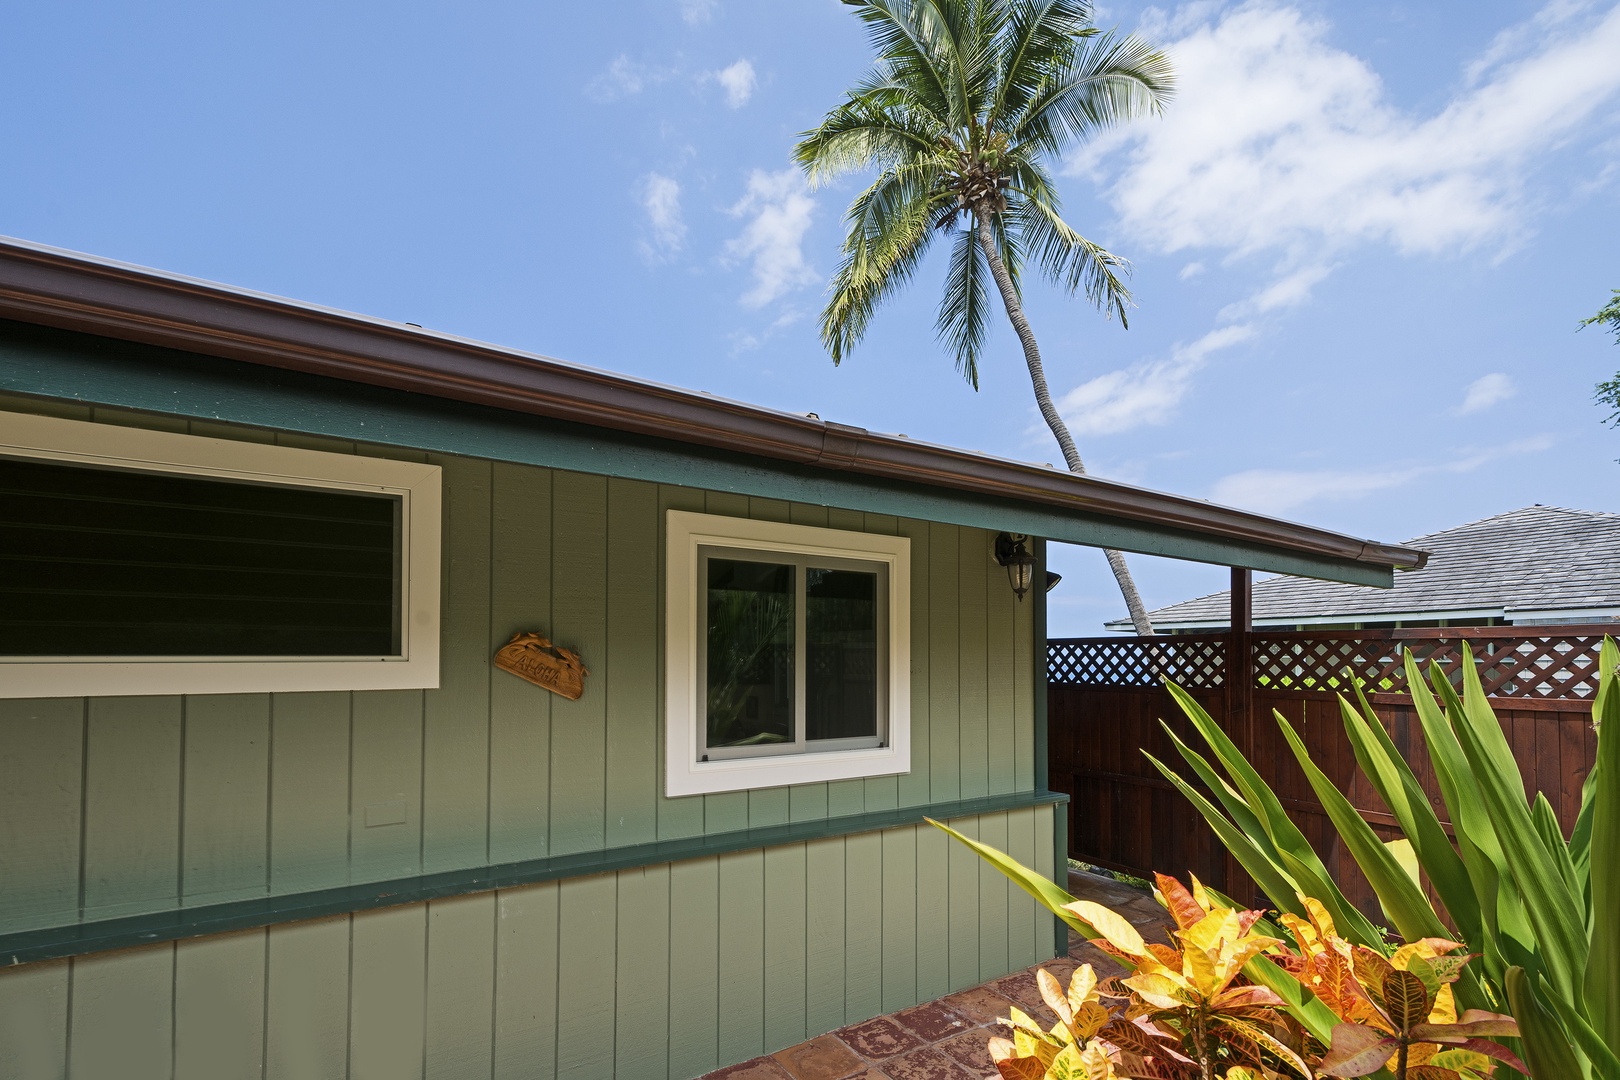 Kailua Kona Vacation Rentals, The Cottage - Northern corner of the home near front entrance